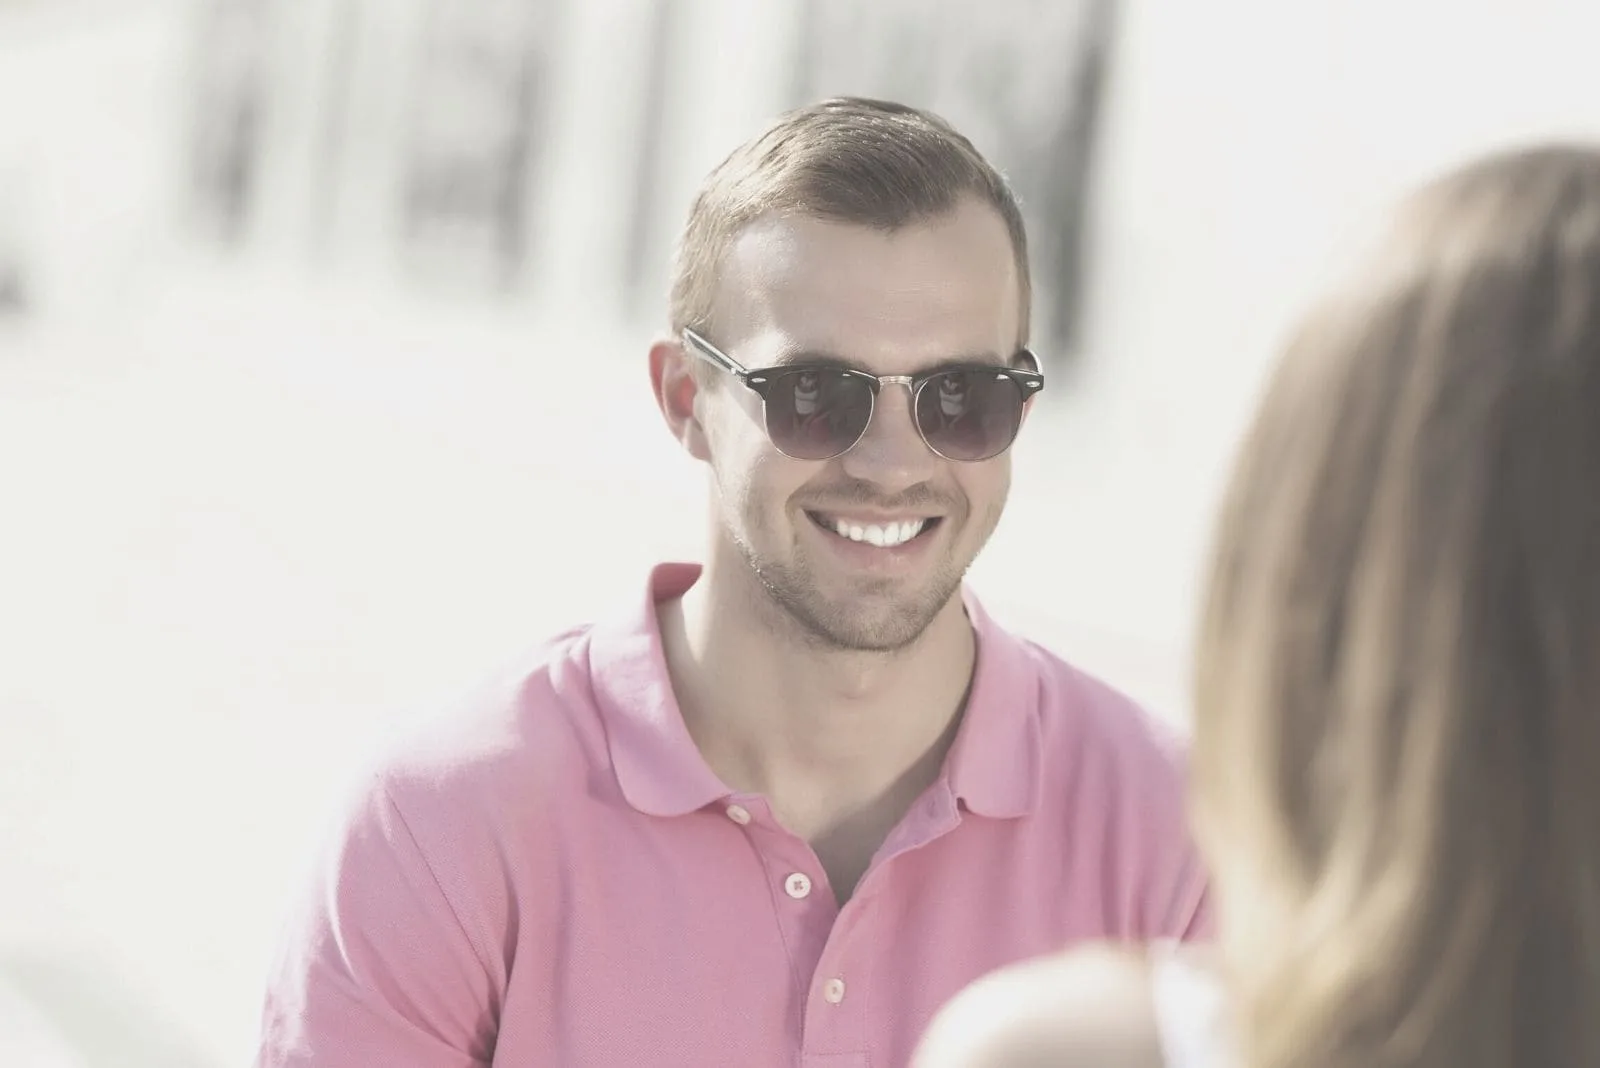 young man in pink top wearing sunglasses smiling at a woman outdoors